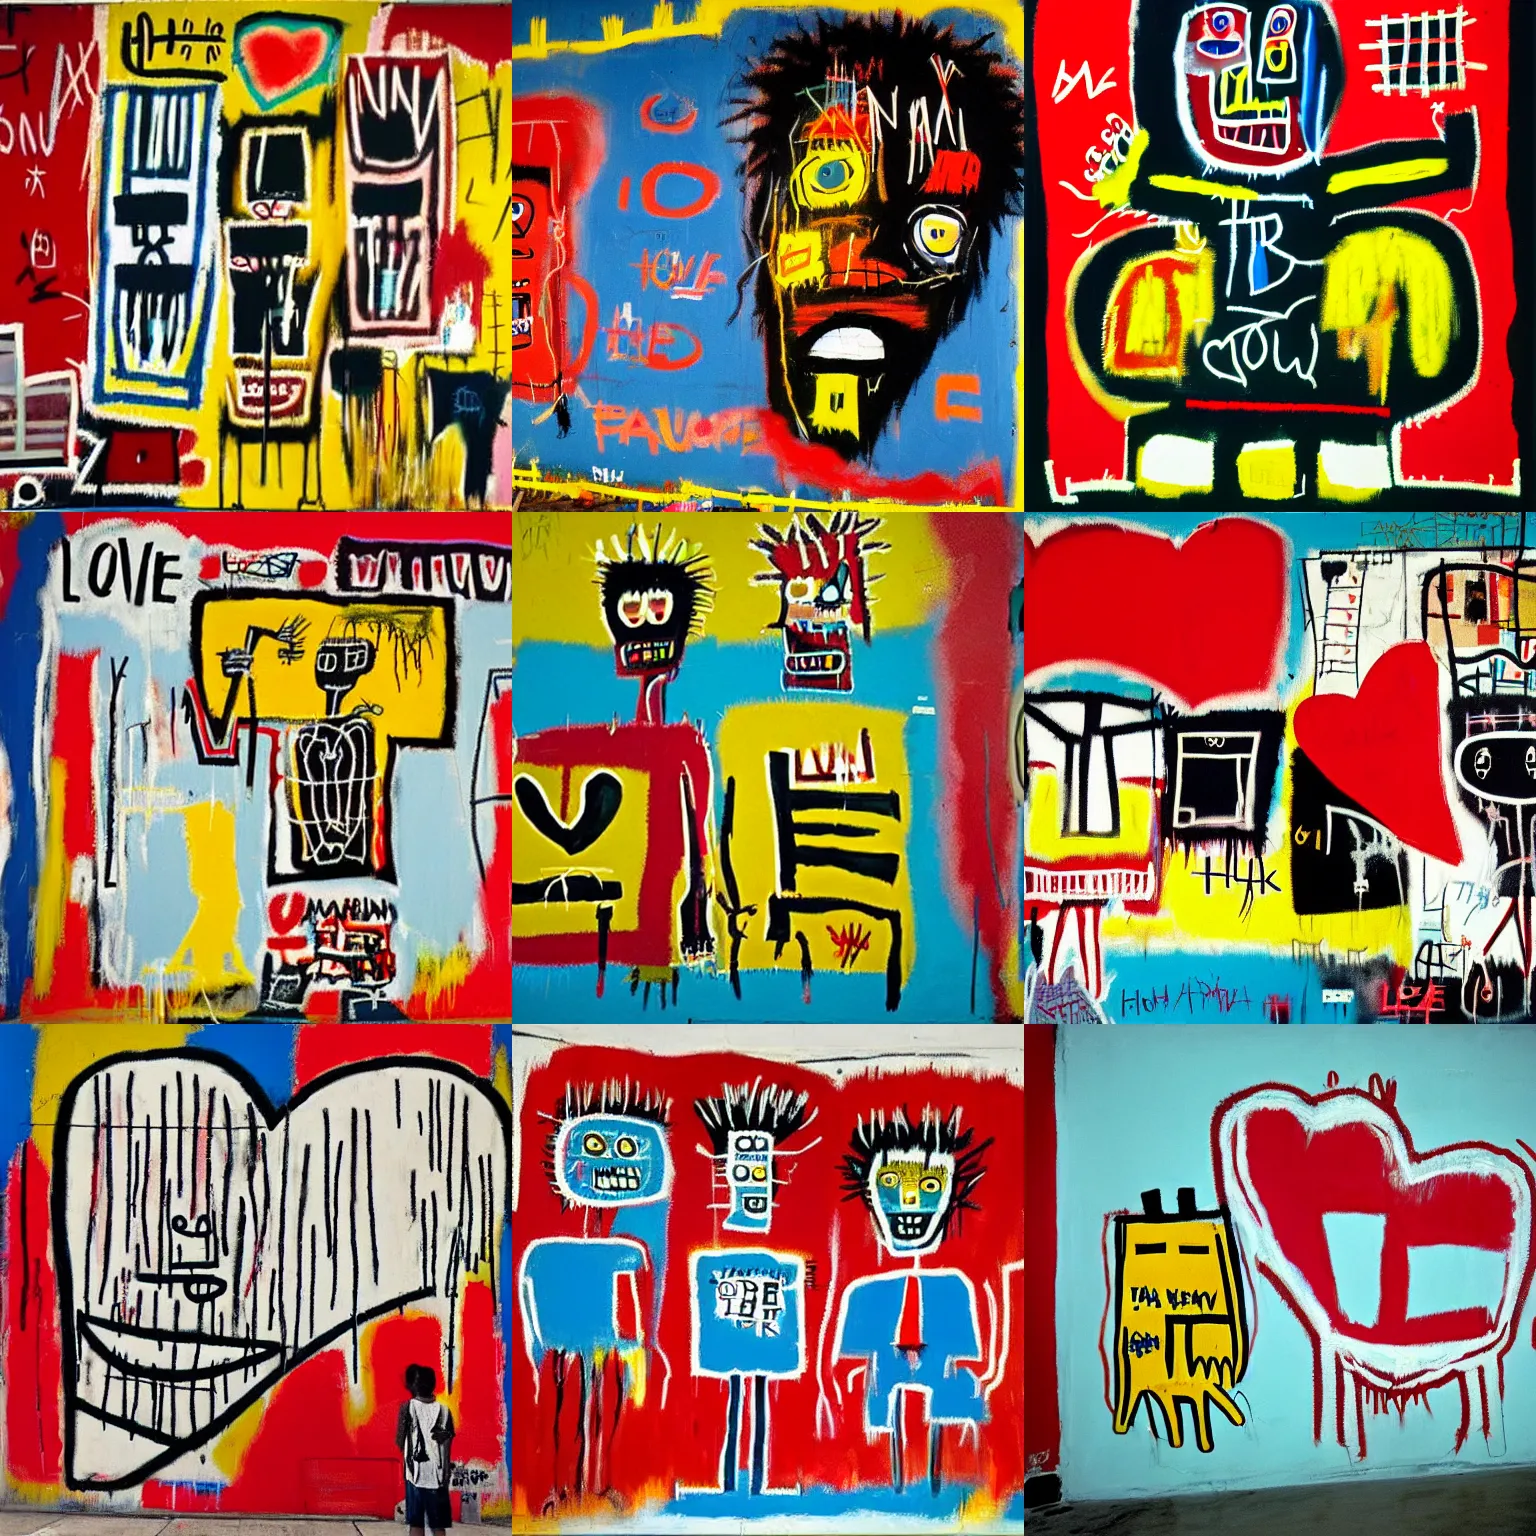 Prompt: love mural by basquiat